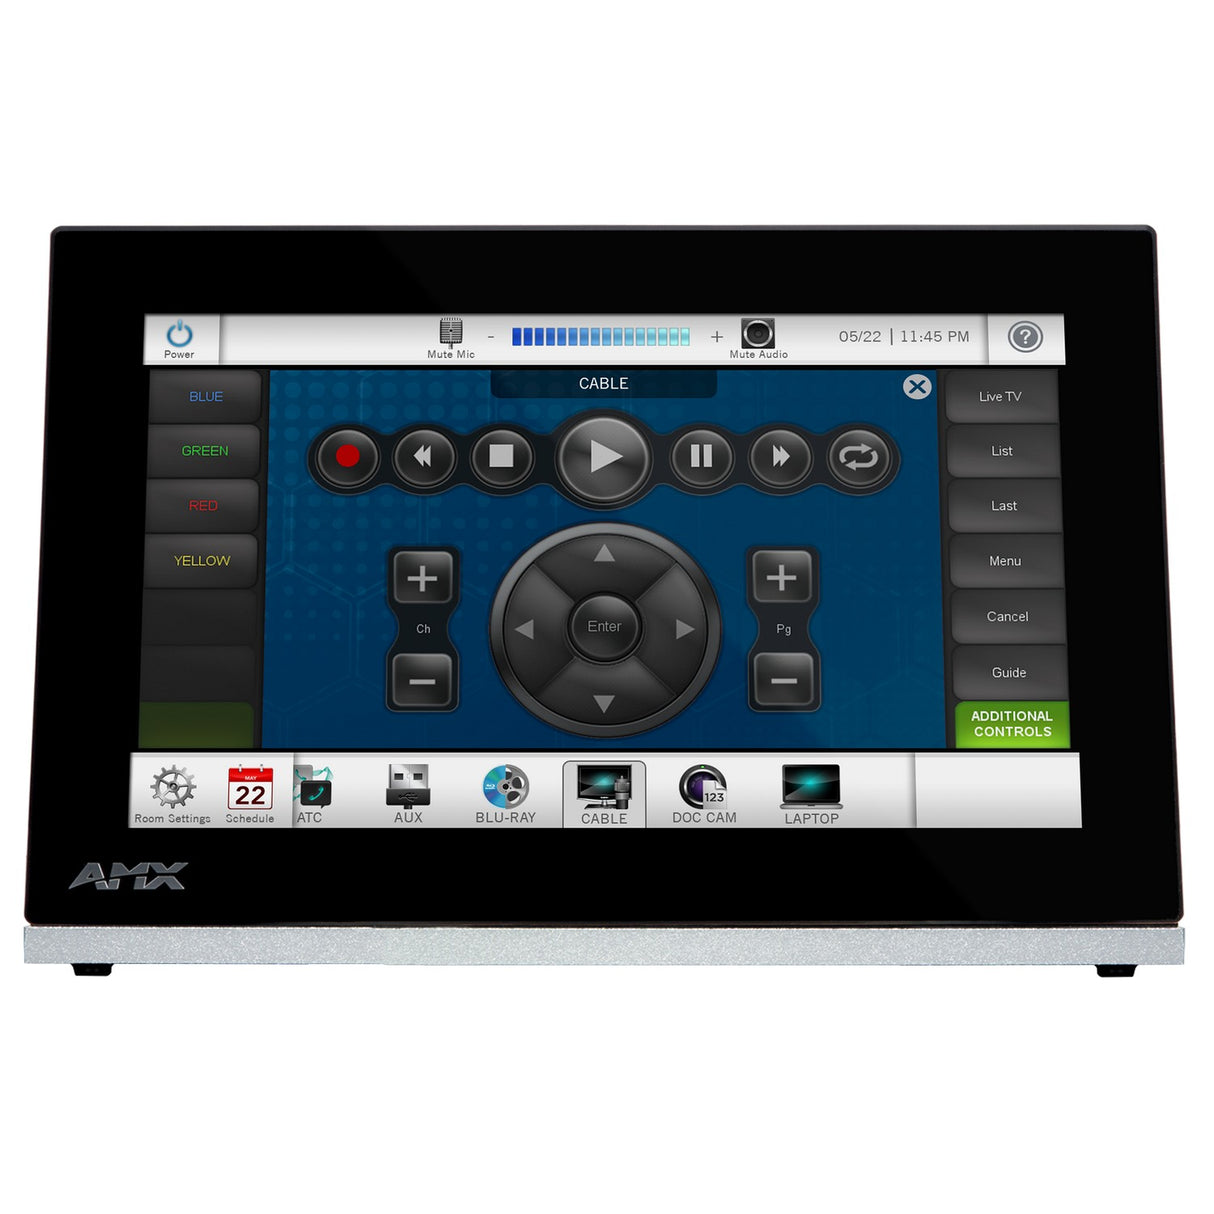 AMX MT-702 Modero G5 7-Inch Tabletop Touch Control Panel